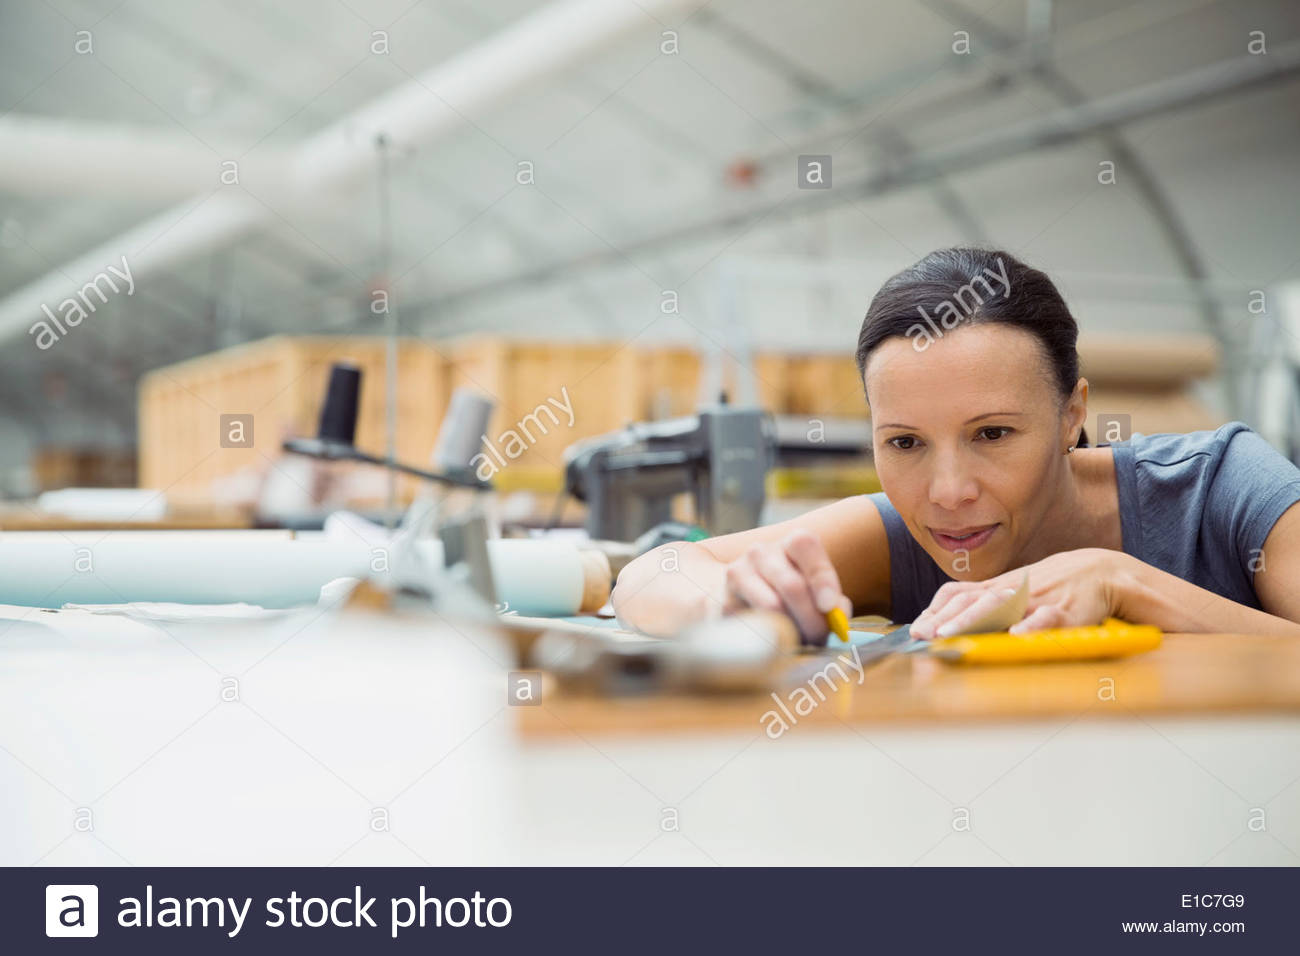 Worker with ruler in textile manufacturing plant Stock Photo